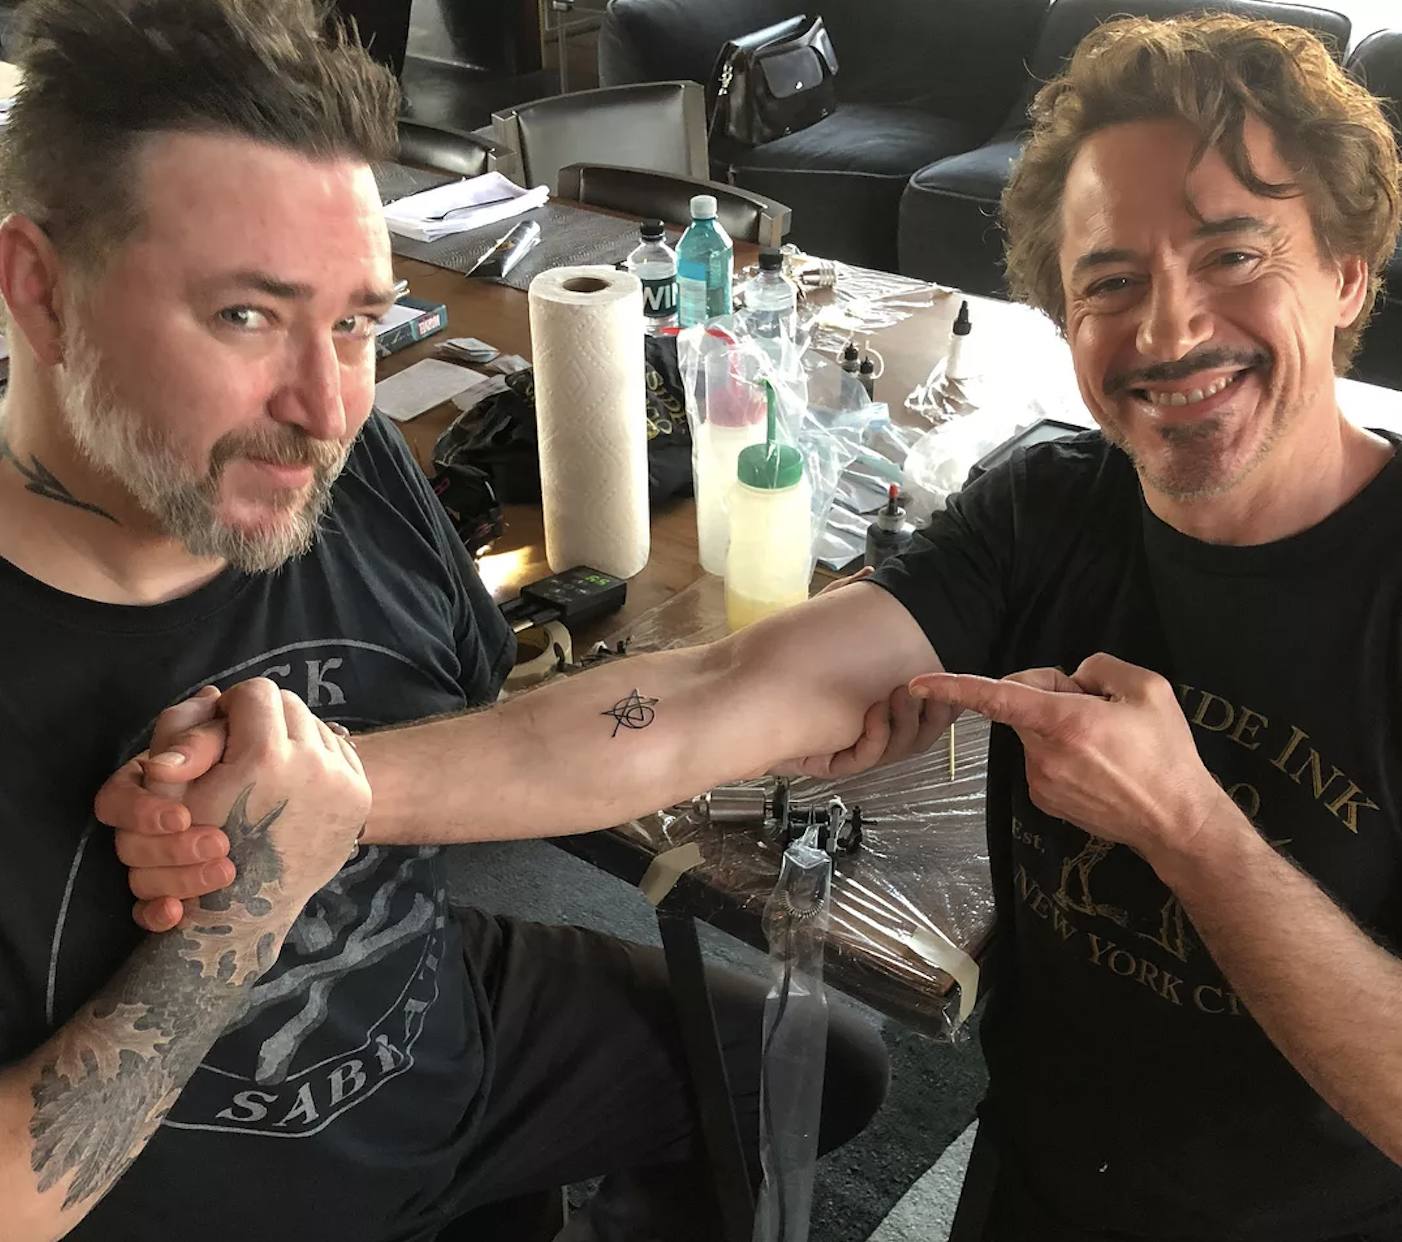 hellojoc and his legendary tattoos handwritten by some our favorite LOTR  cast members! 🔥 | Instagram